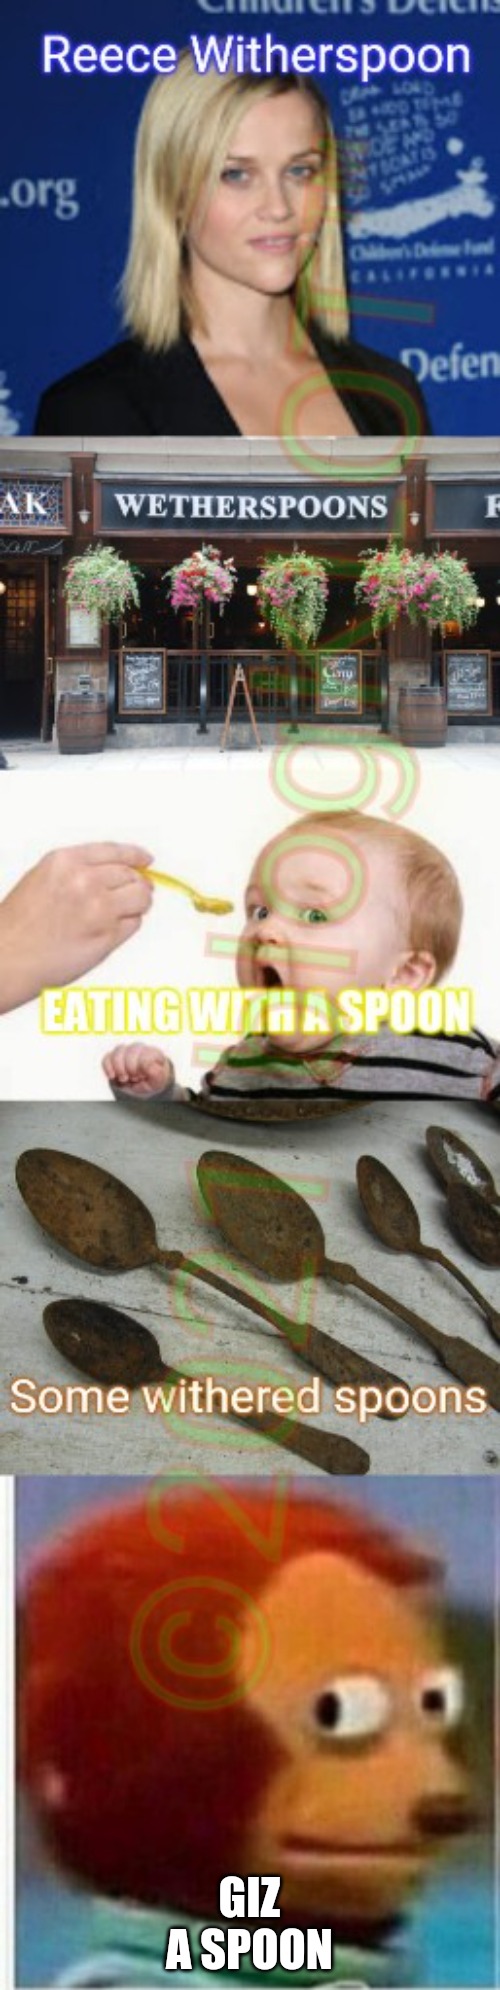 Give us a spoon | GIZ A SPOON | image tagged in spoon,eating | made w/ Imgflip meme maker